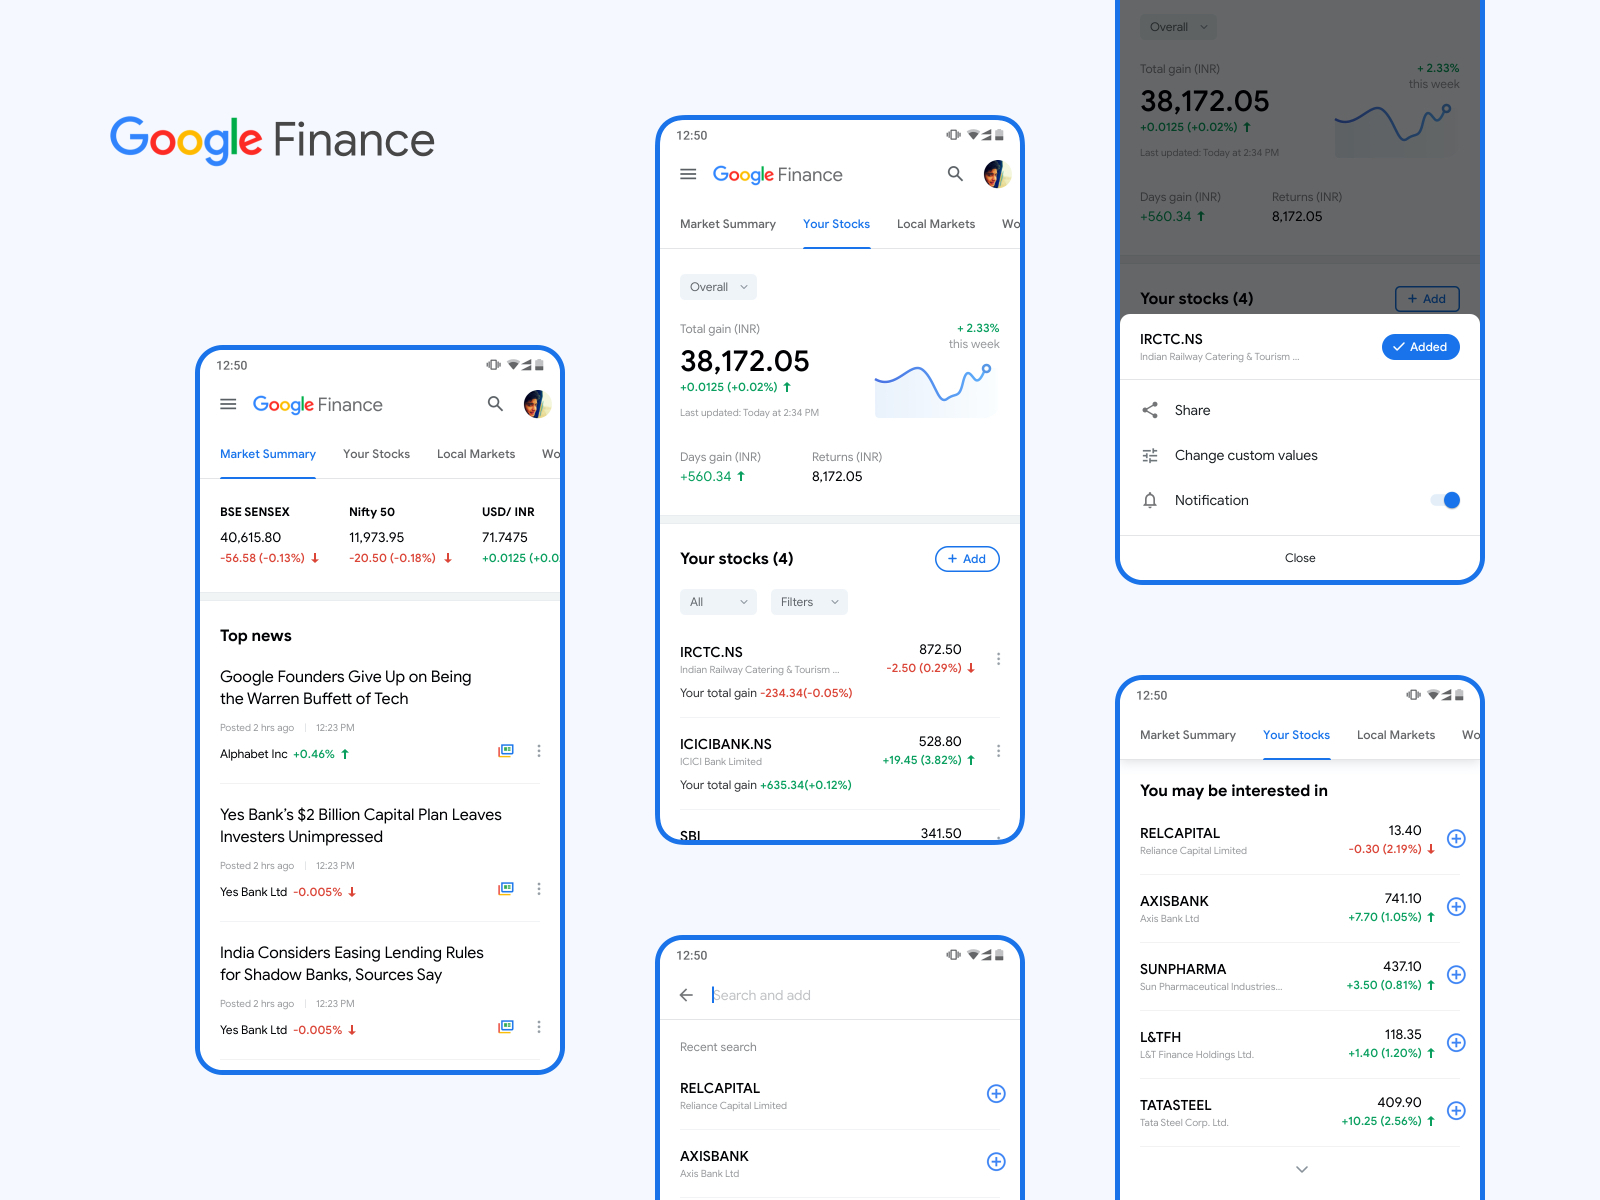 Google Finance Redesign by Shahrukh Khan on Dribbble